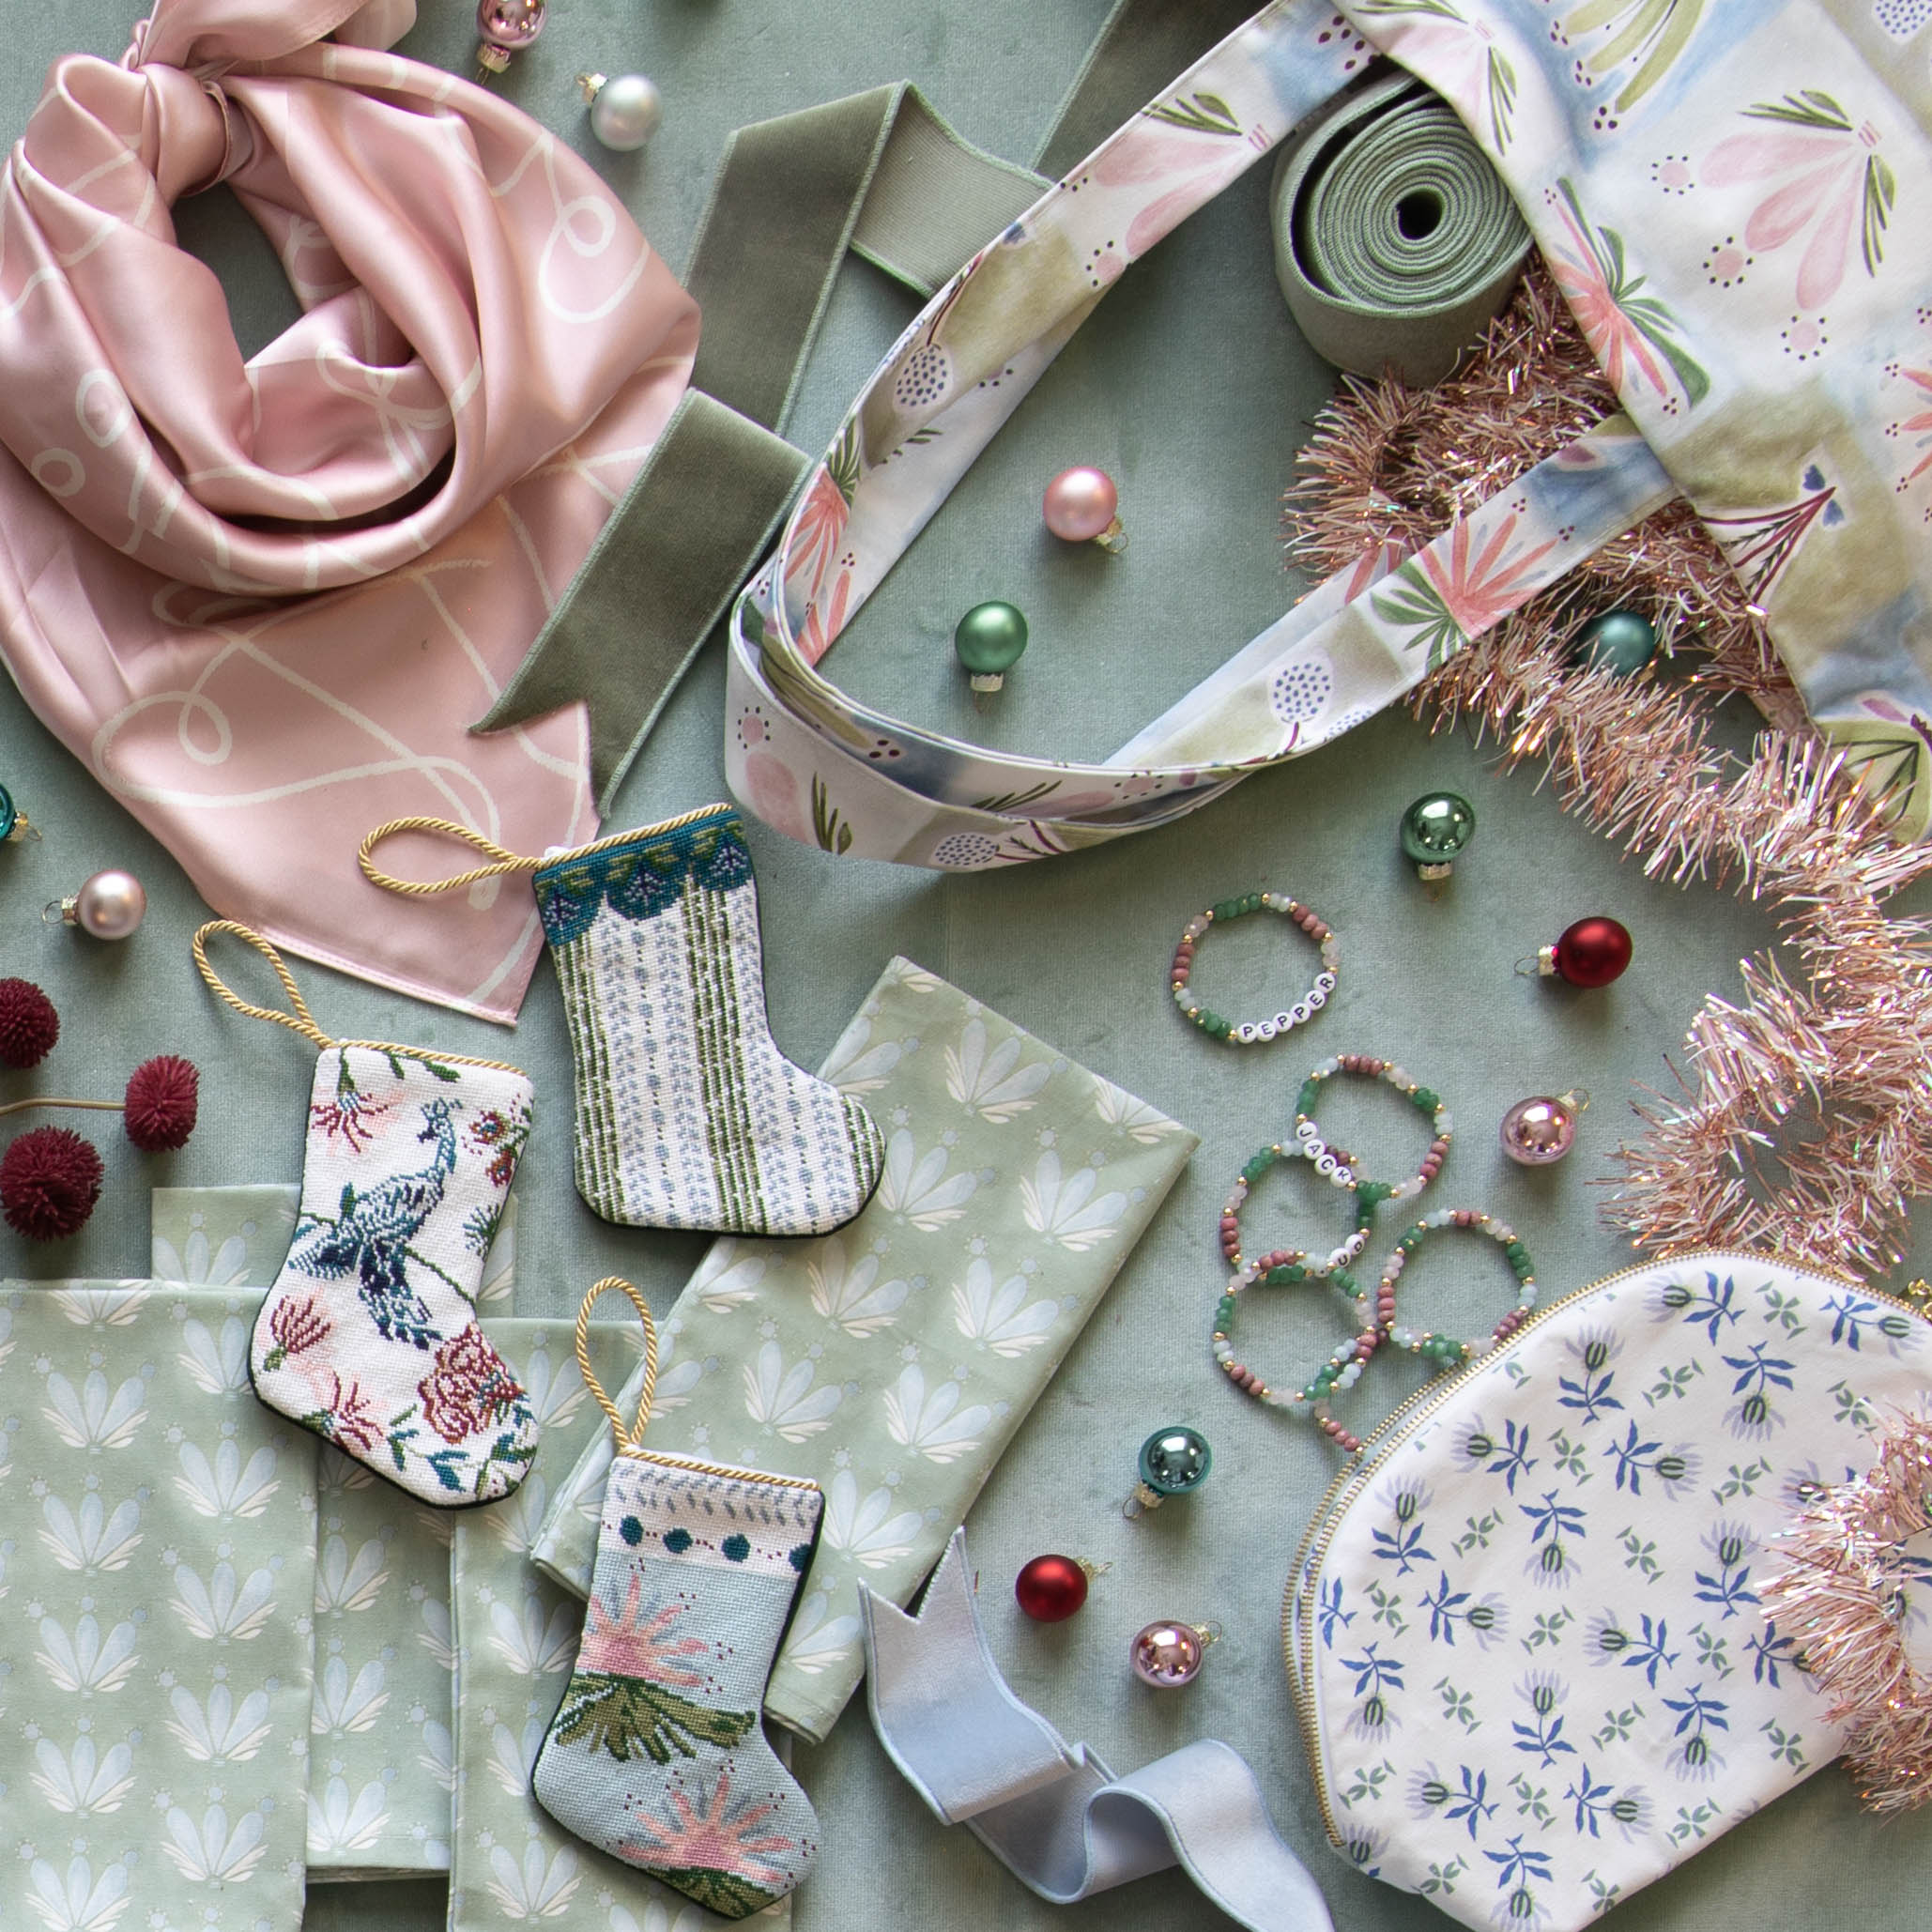 Interior design moodboard and fabric inspirations with Blue & Green Floral Drop Repeat printed cotton swatch next to three hand sown mini bauble stockings and small Christmas ornaments